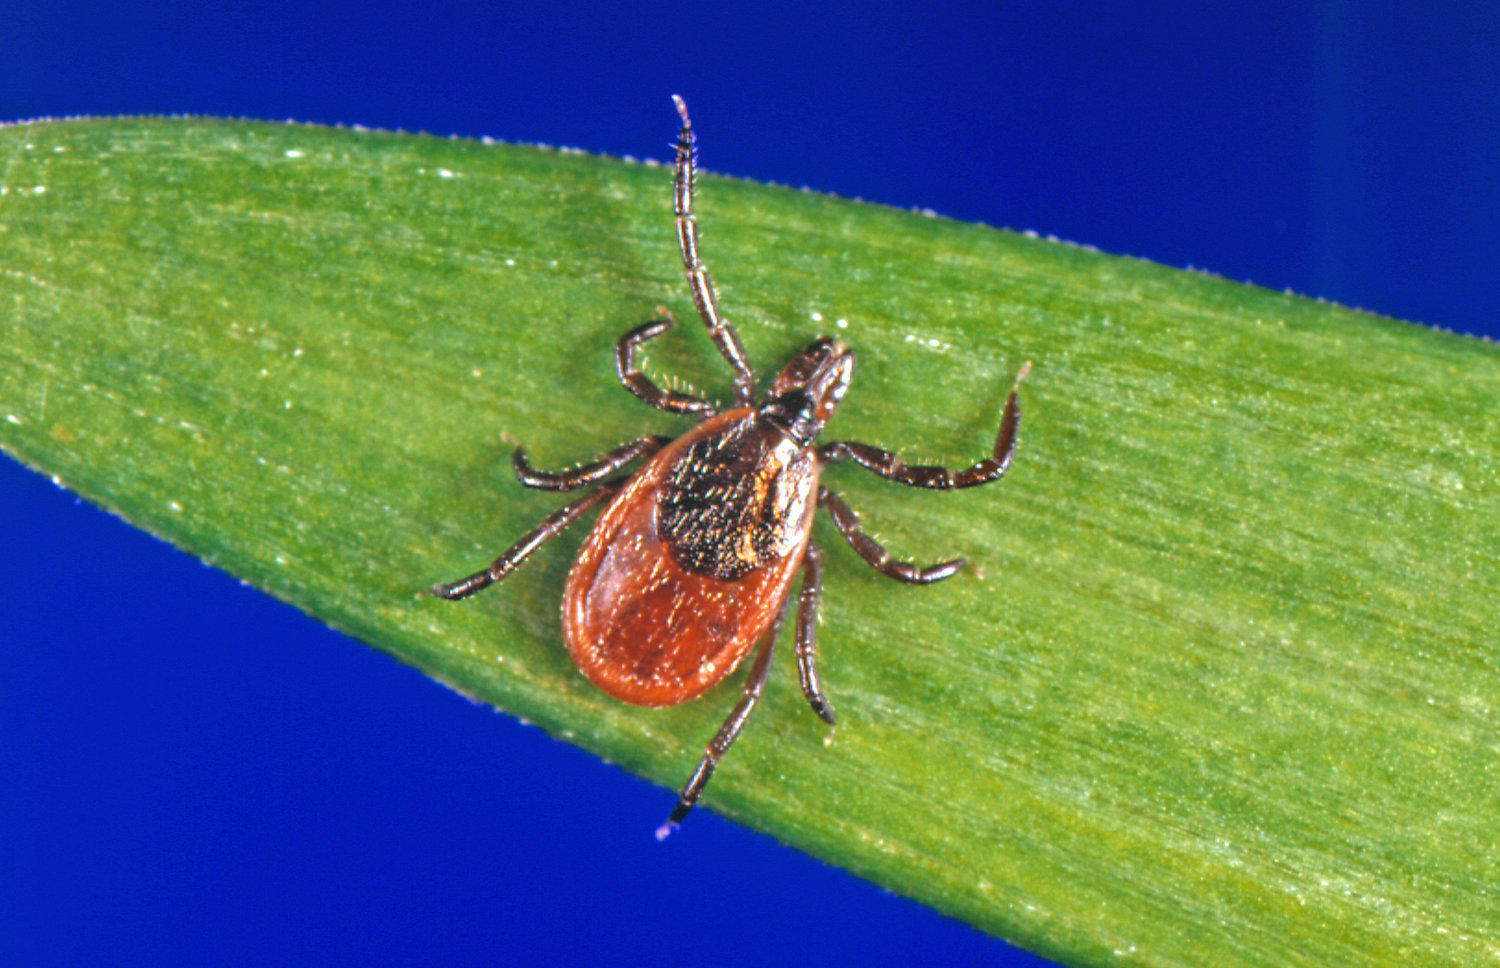 In this undated photo provided by the U.S. Centers for Disease Control and Prevention (CDC), a blacklegged tick - also known as a deer tick - sits on a leaf waiting for a host to wander by.